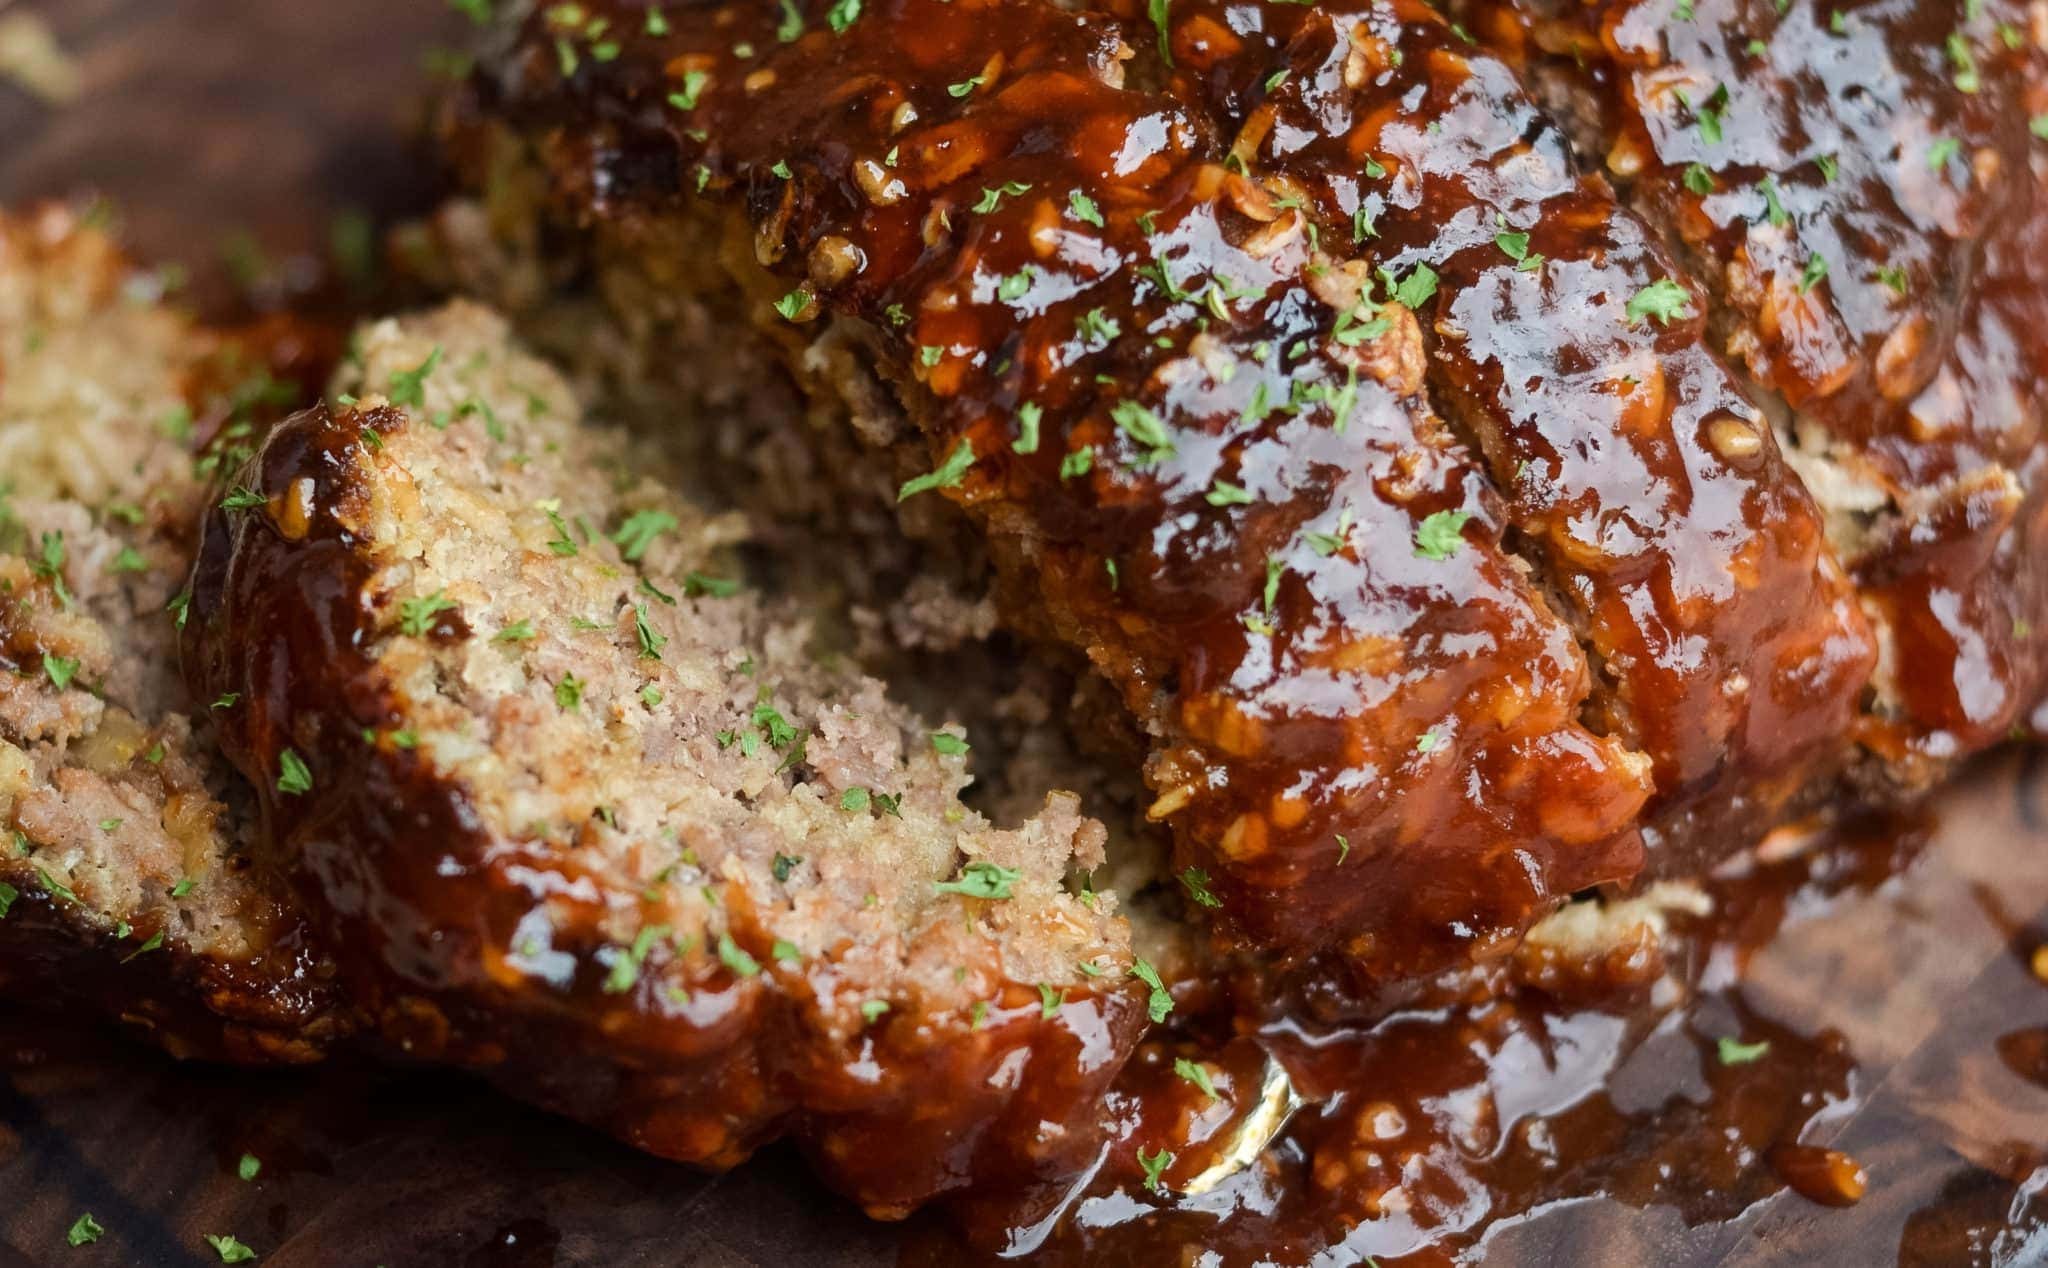 How to make a meatloaf in the Ninja Foodi Grill